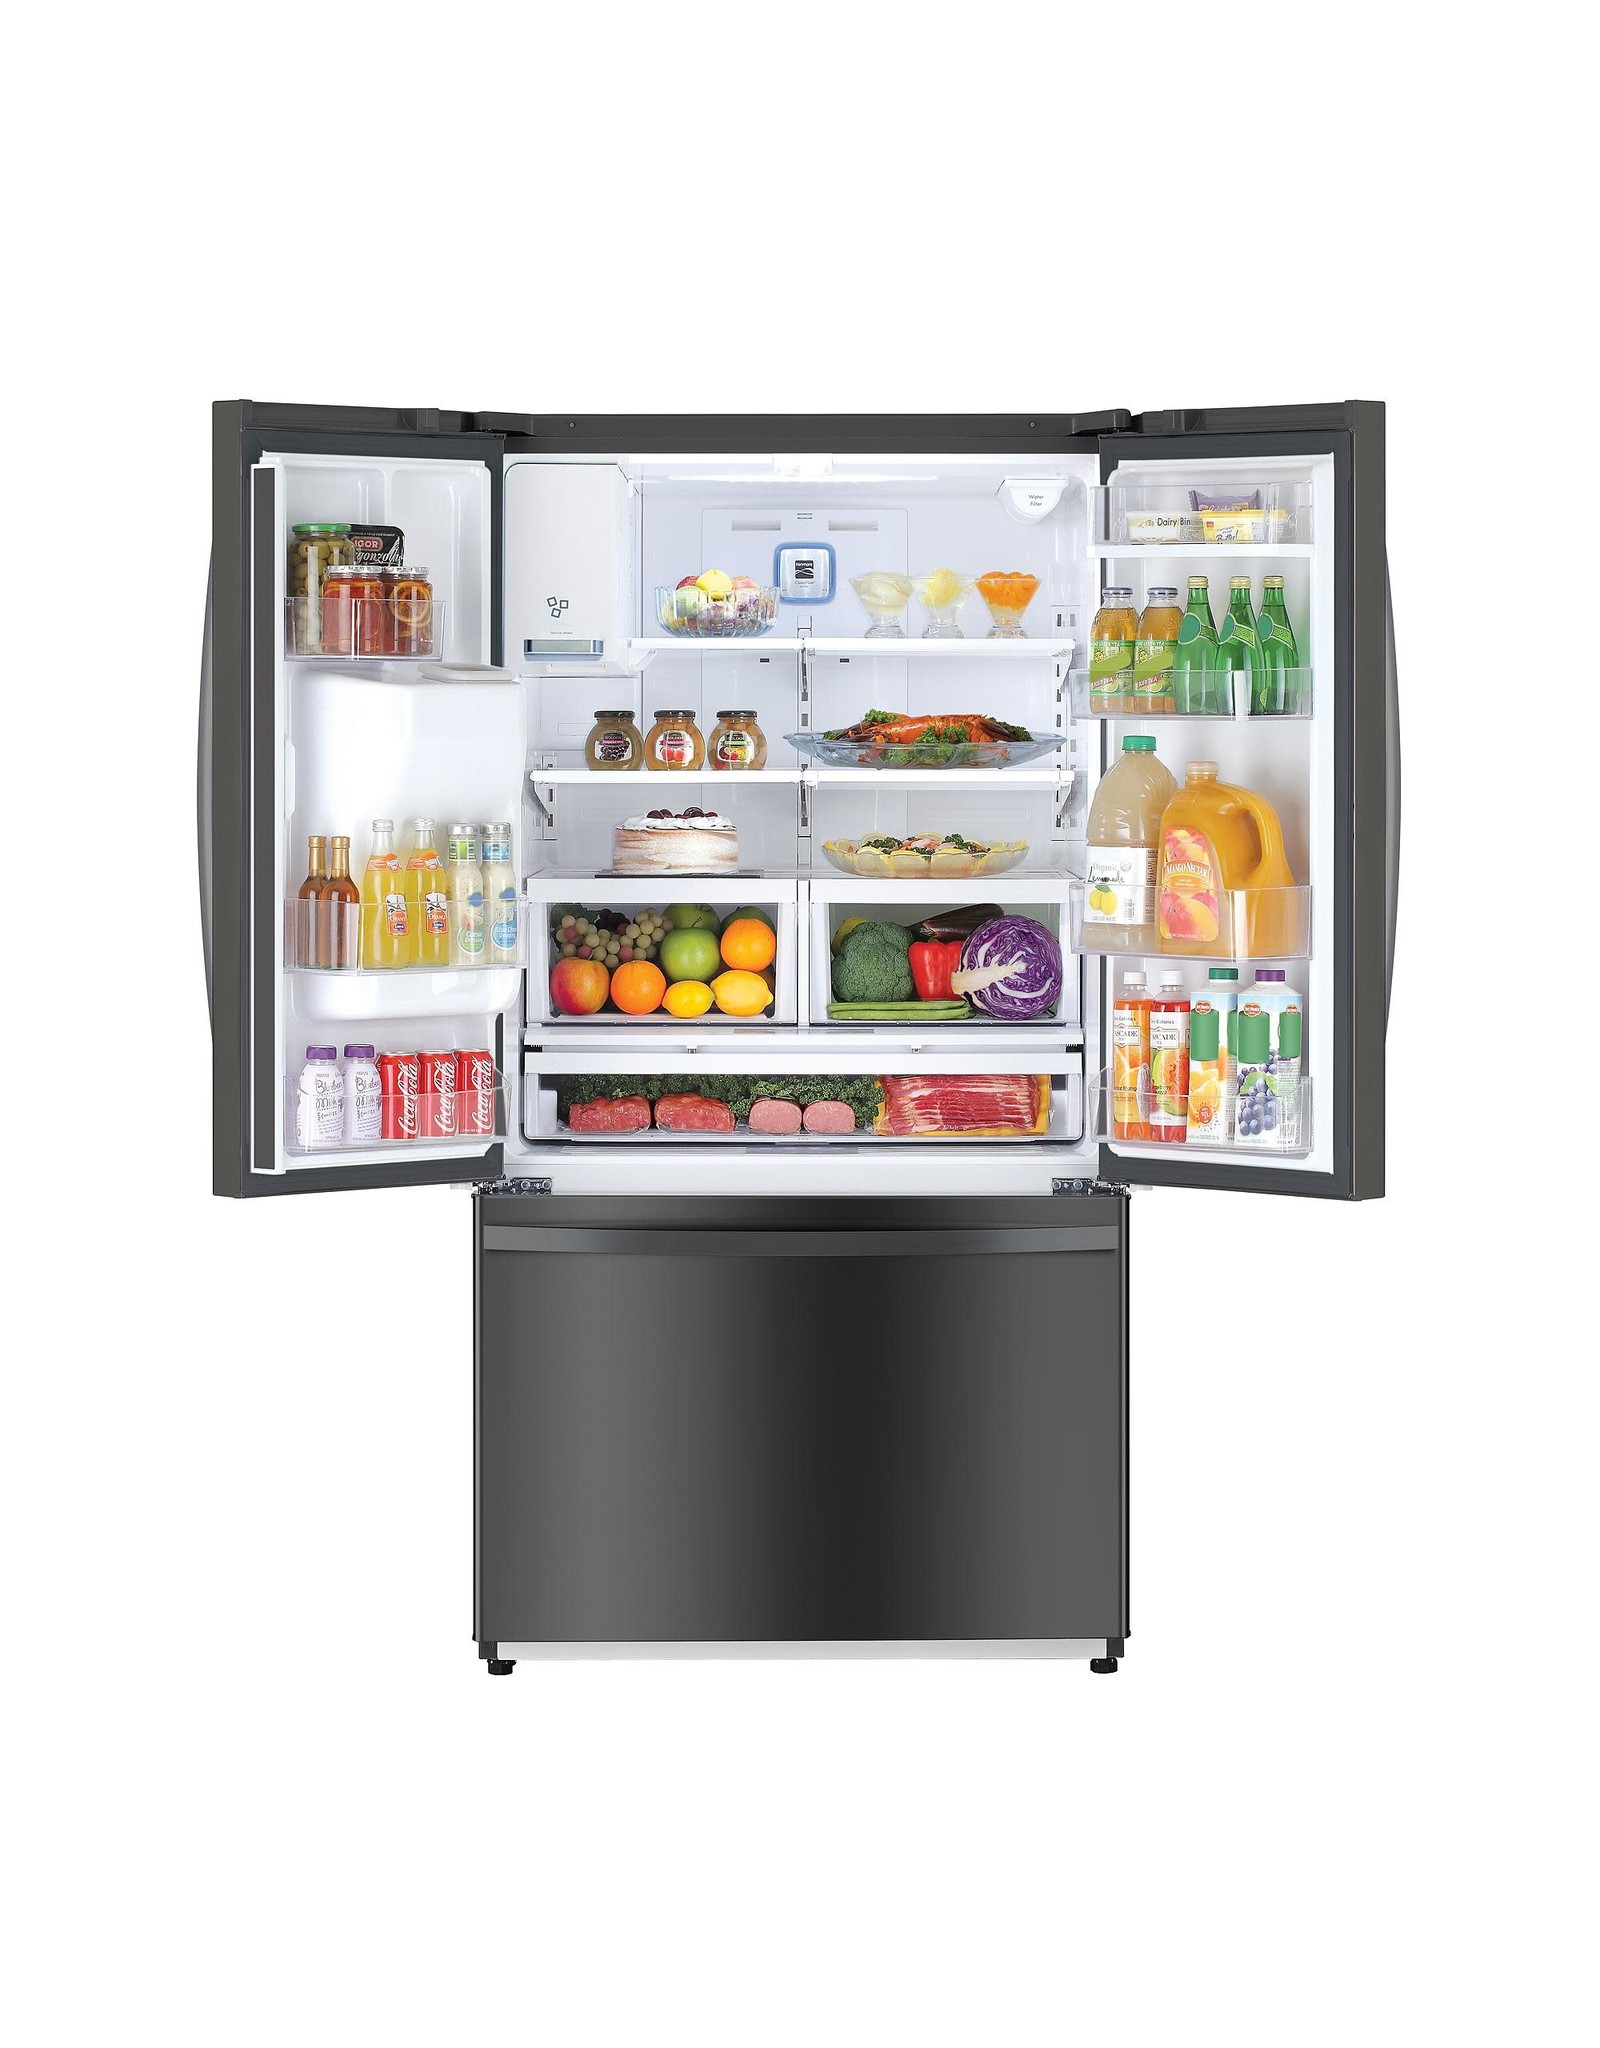 KENMORE ( Kenmore 75507 25.5 cu. ft. French Door Refrigerator with Dual Ice Makers - Black Stainless Steel